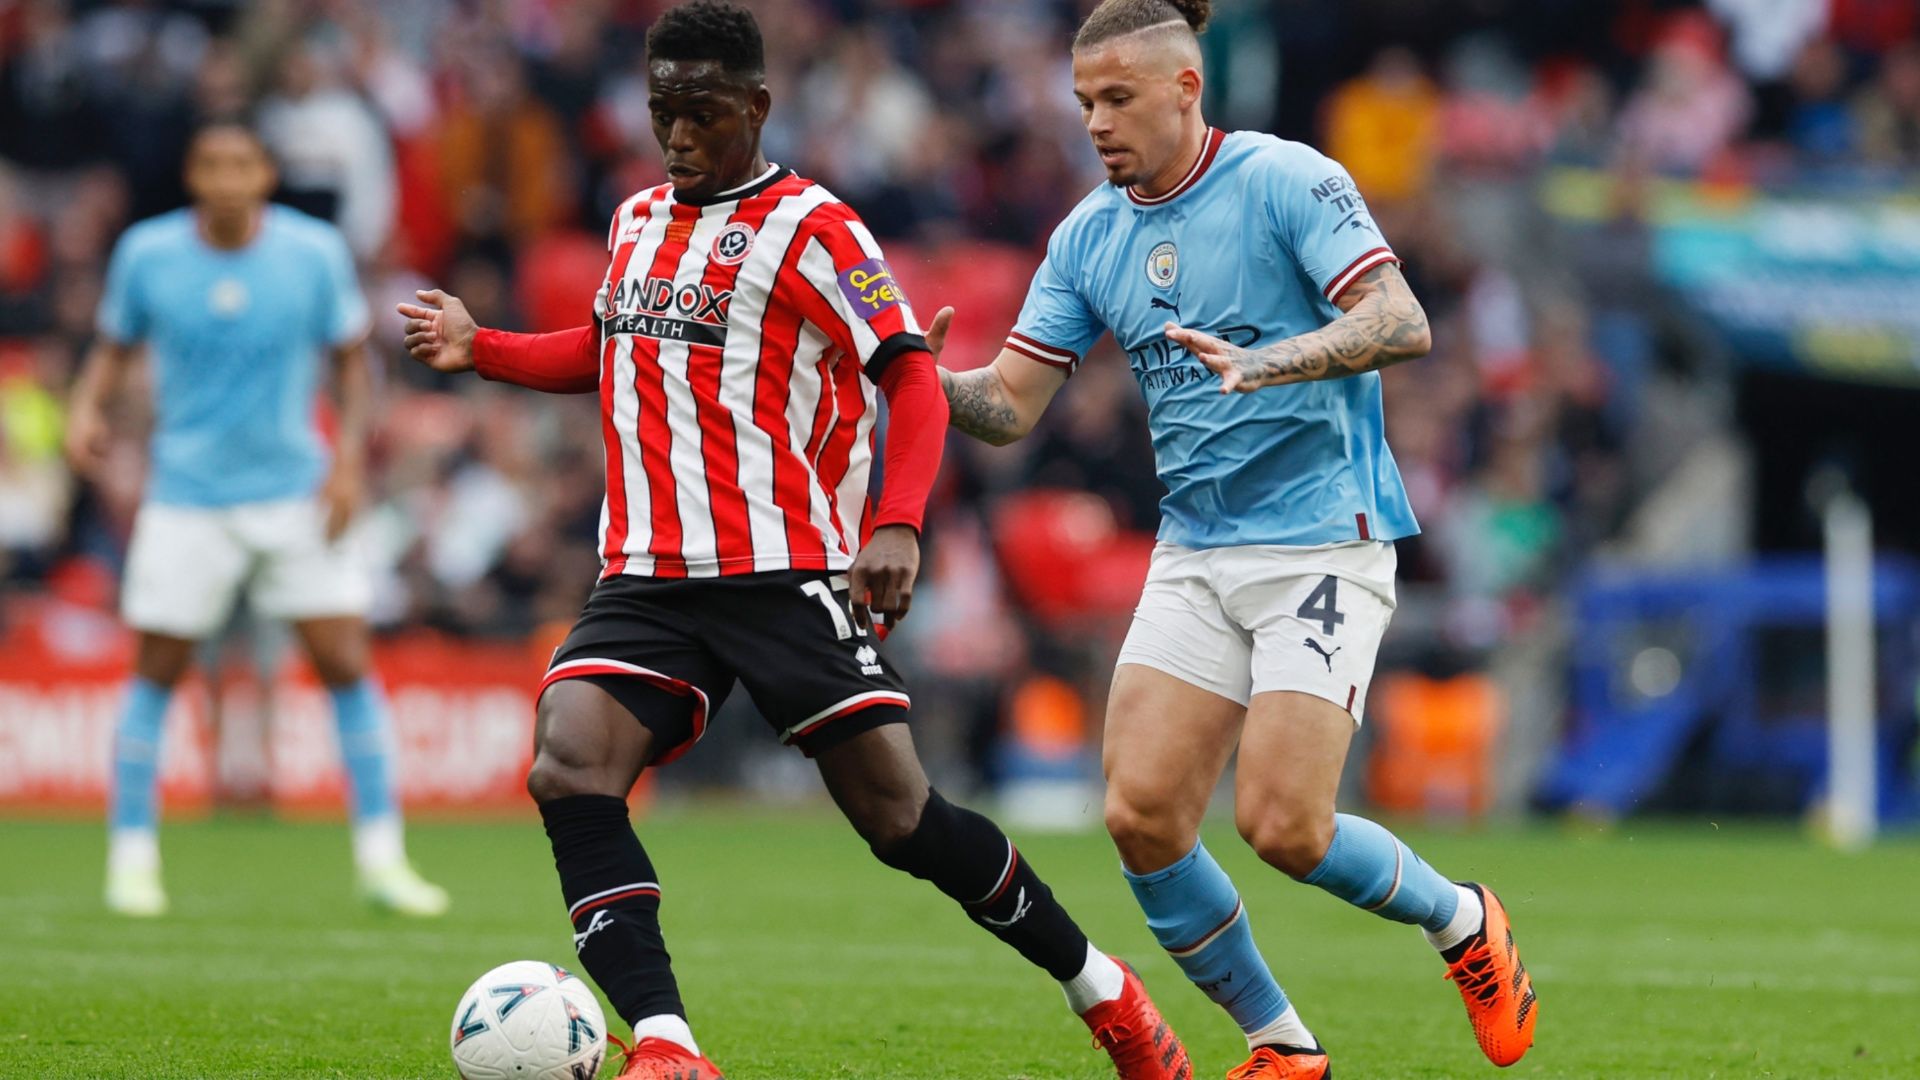 Ismaila Coulibaly of Sheffield United with Man City’s Kalvin Phillips